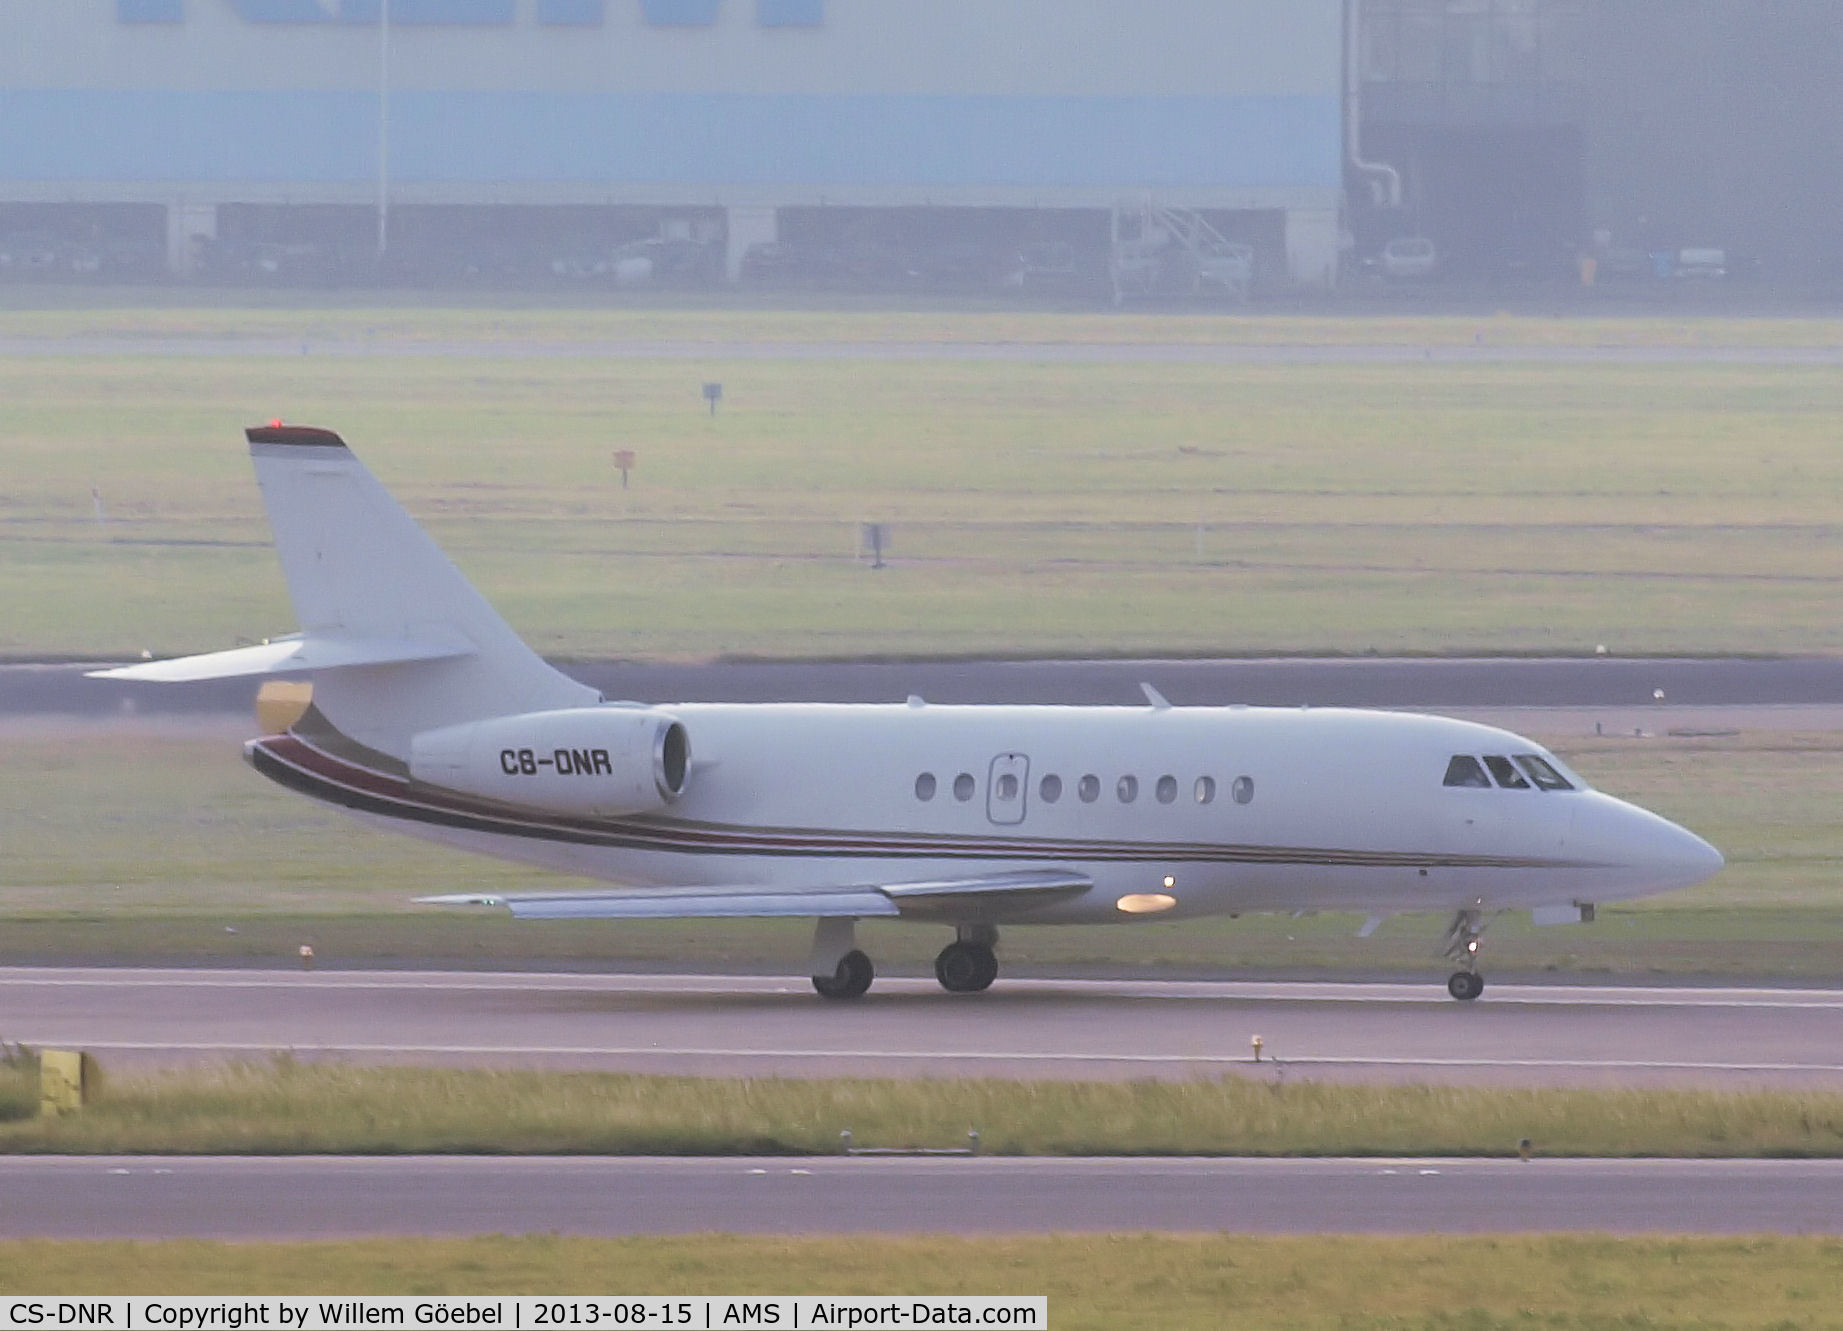 CS-DNR, 2000 Dassault Falcon 2000 C/N 120, Taxi to runway 27 of Schiphol Airport